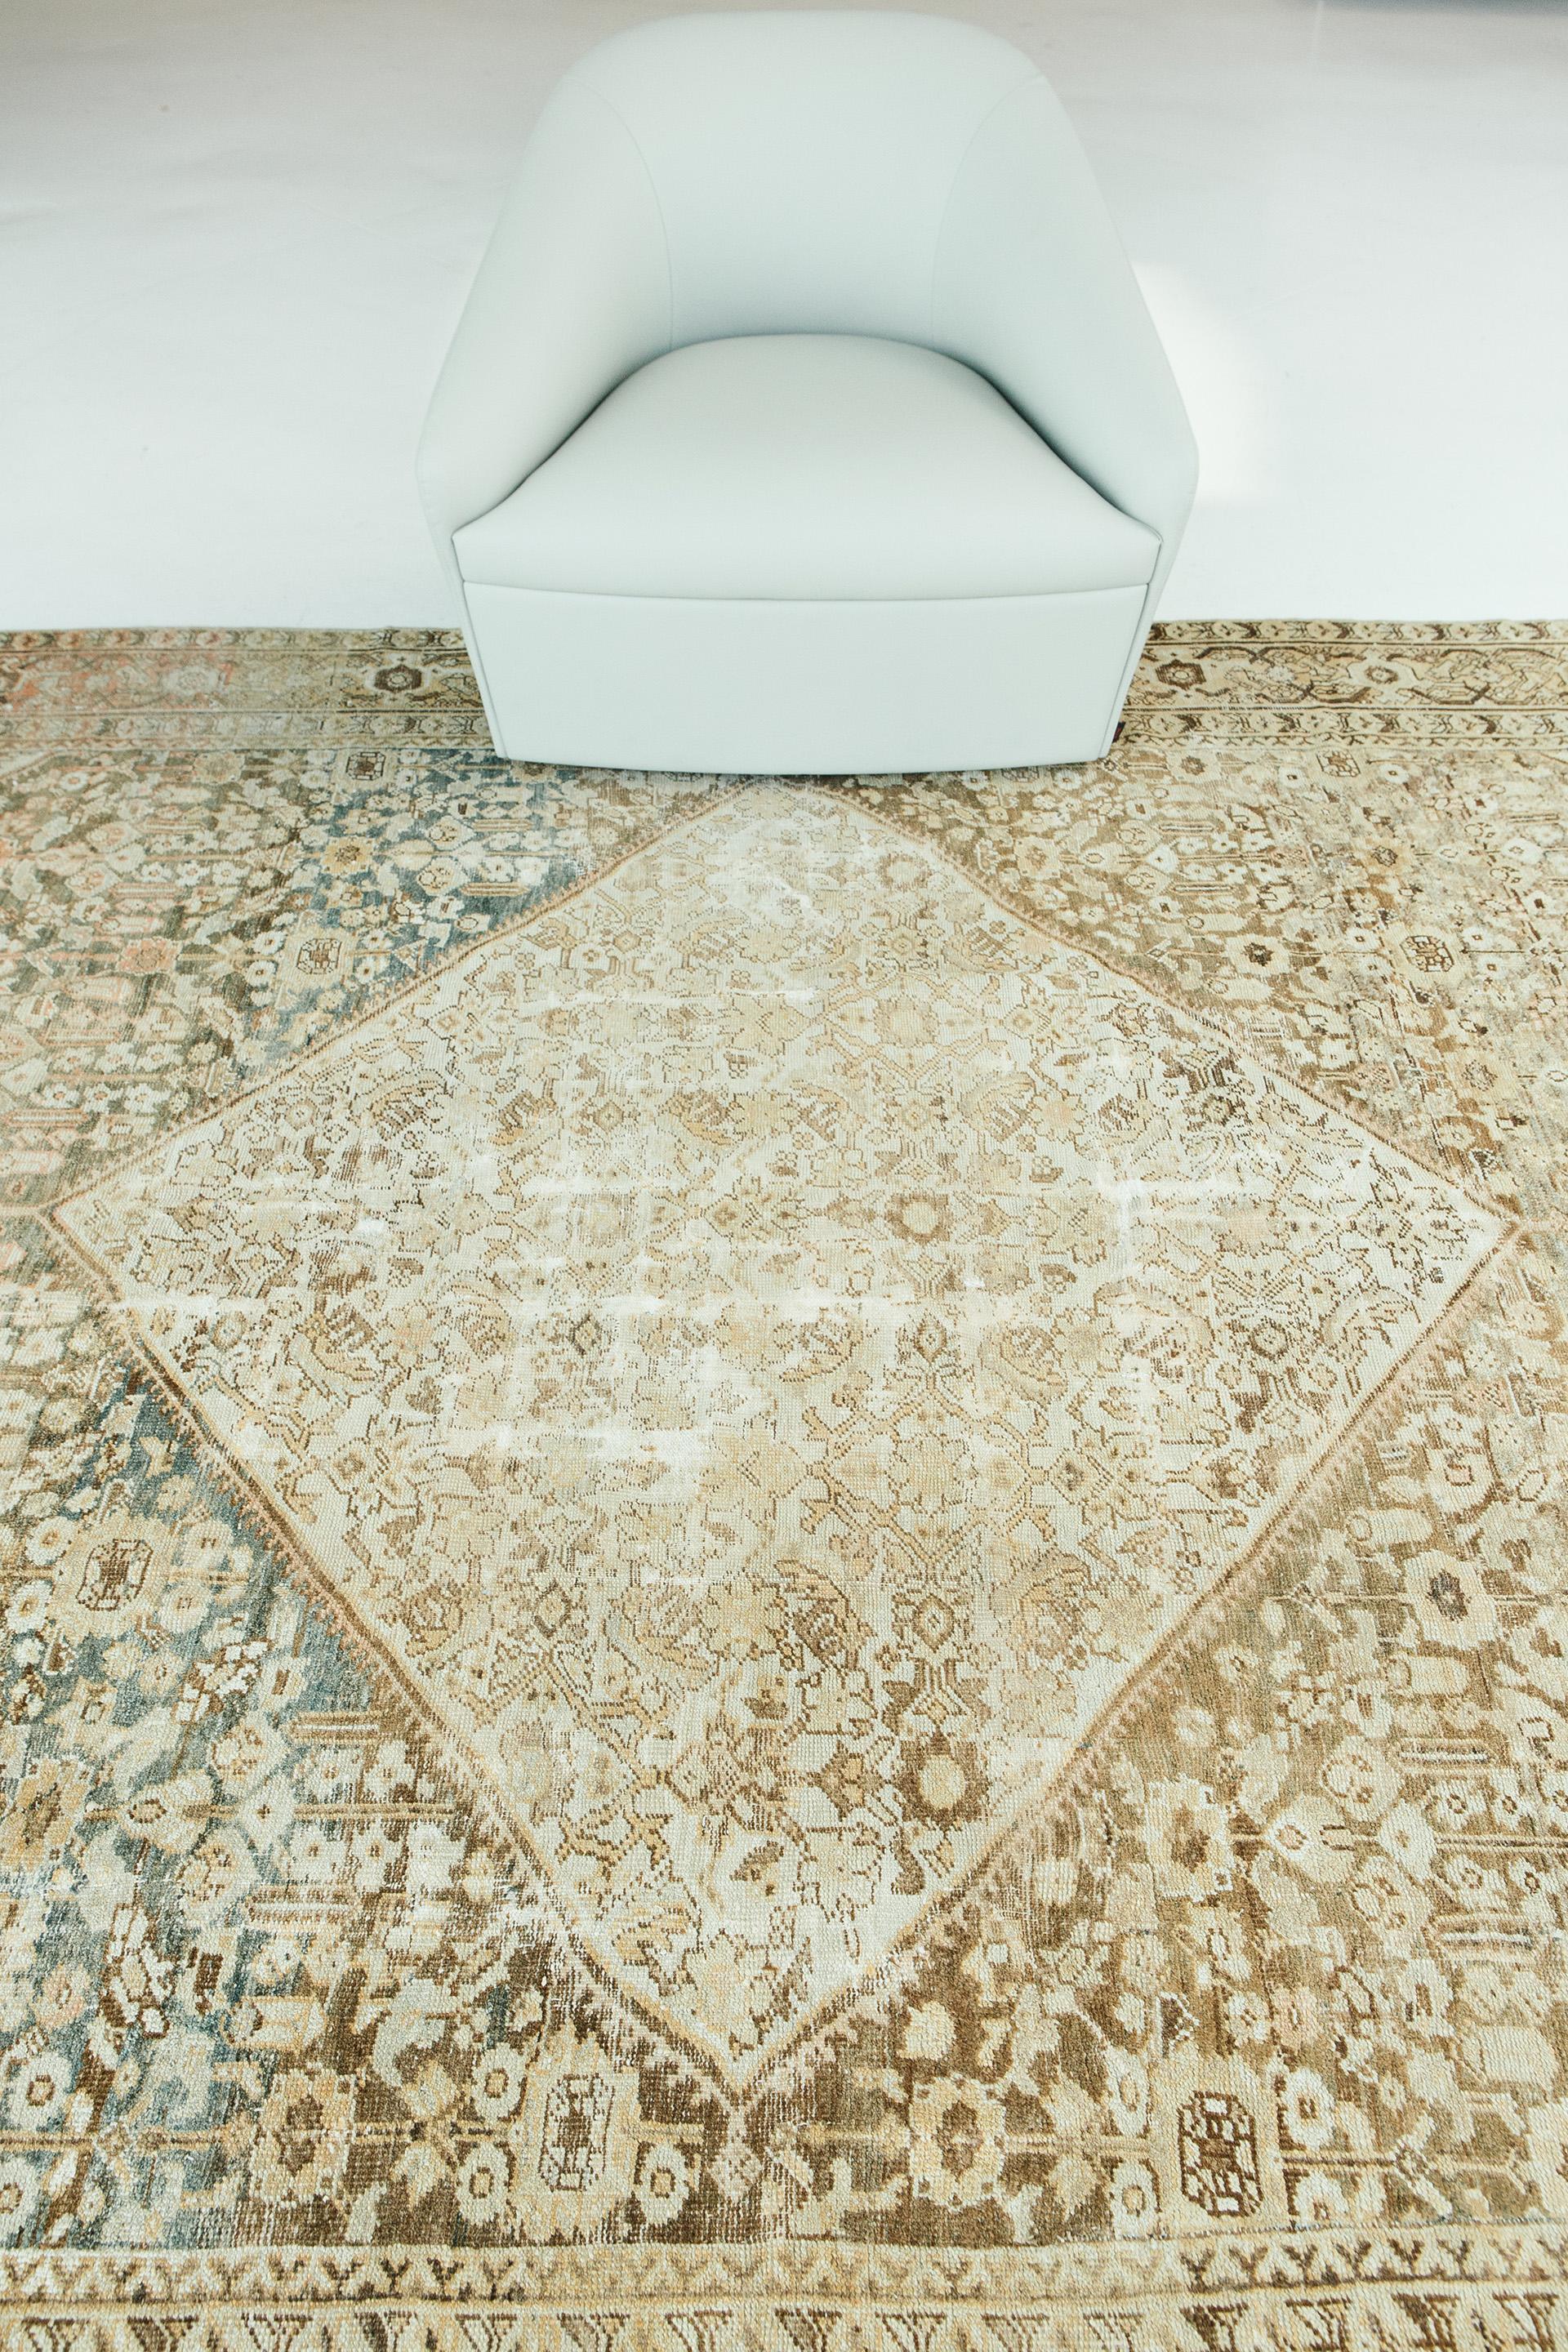 Soft tan and umber abrash toned pile are offset by fruity pinks and earthy indigos in this perfectly weathered antique Mahal. While etched passages reveal the touch of time, the geometry of rug’s medallion, field, cornerpieces and border areas